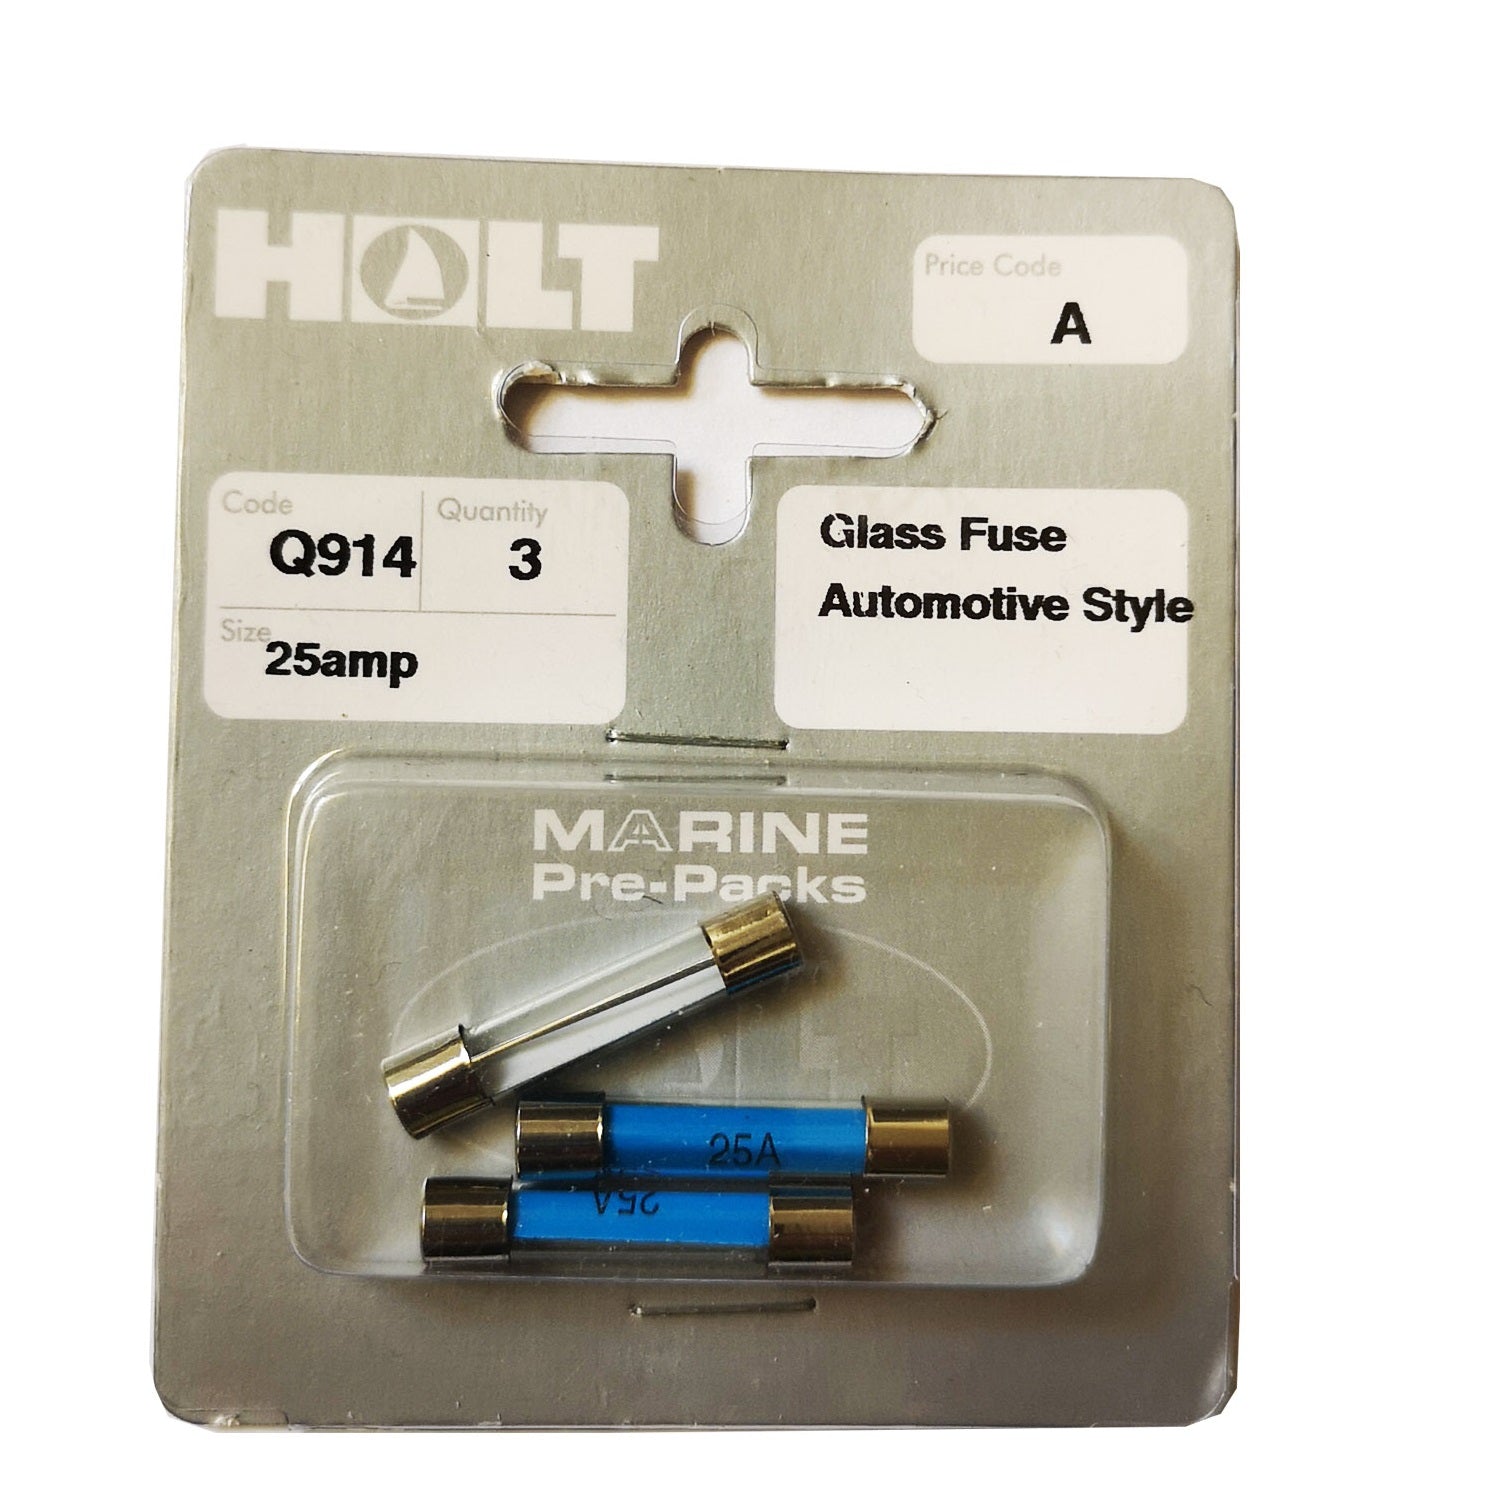 Holt Marine Q914 Automotive Style Glass Fuse Pkt3 - 25amp - Premium Fuses from Holt Marine - Just $1.99! Shop now at W Hurst & Son (IW) Ltd